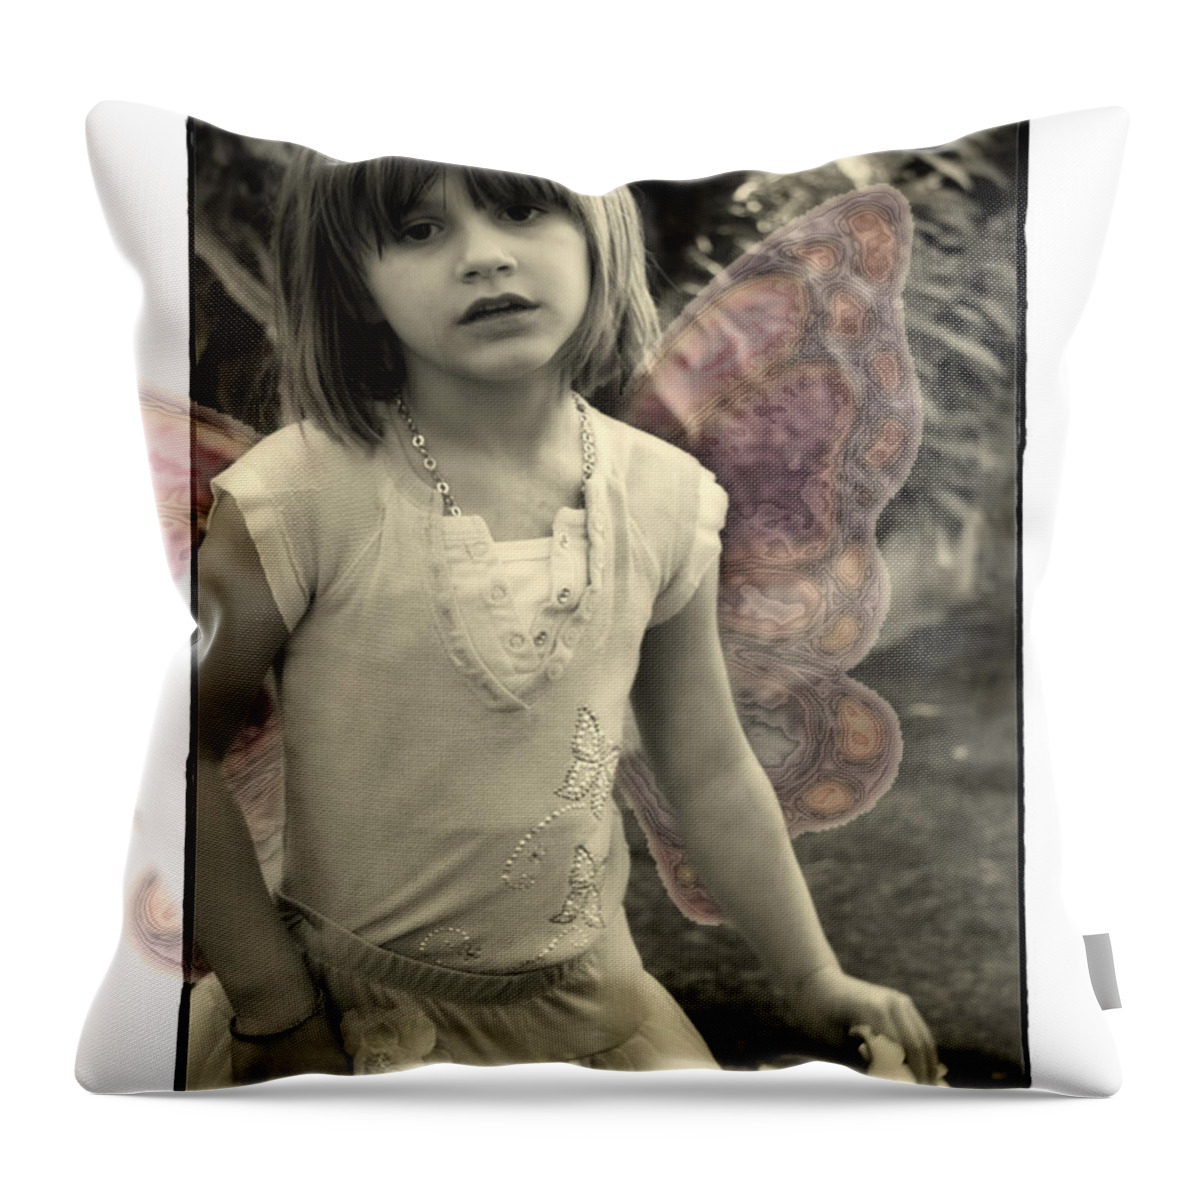 Fairy Throw Pillow featuring the photograph Between Worlds by Diana Haronis